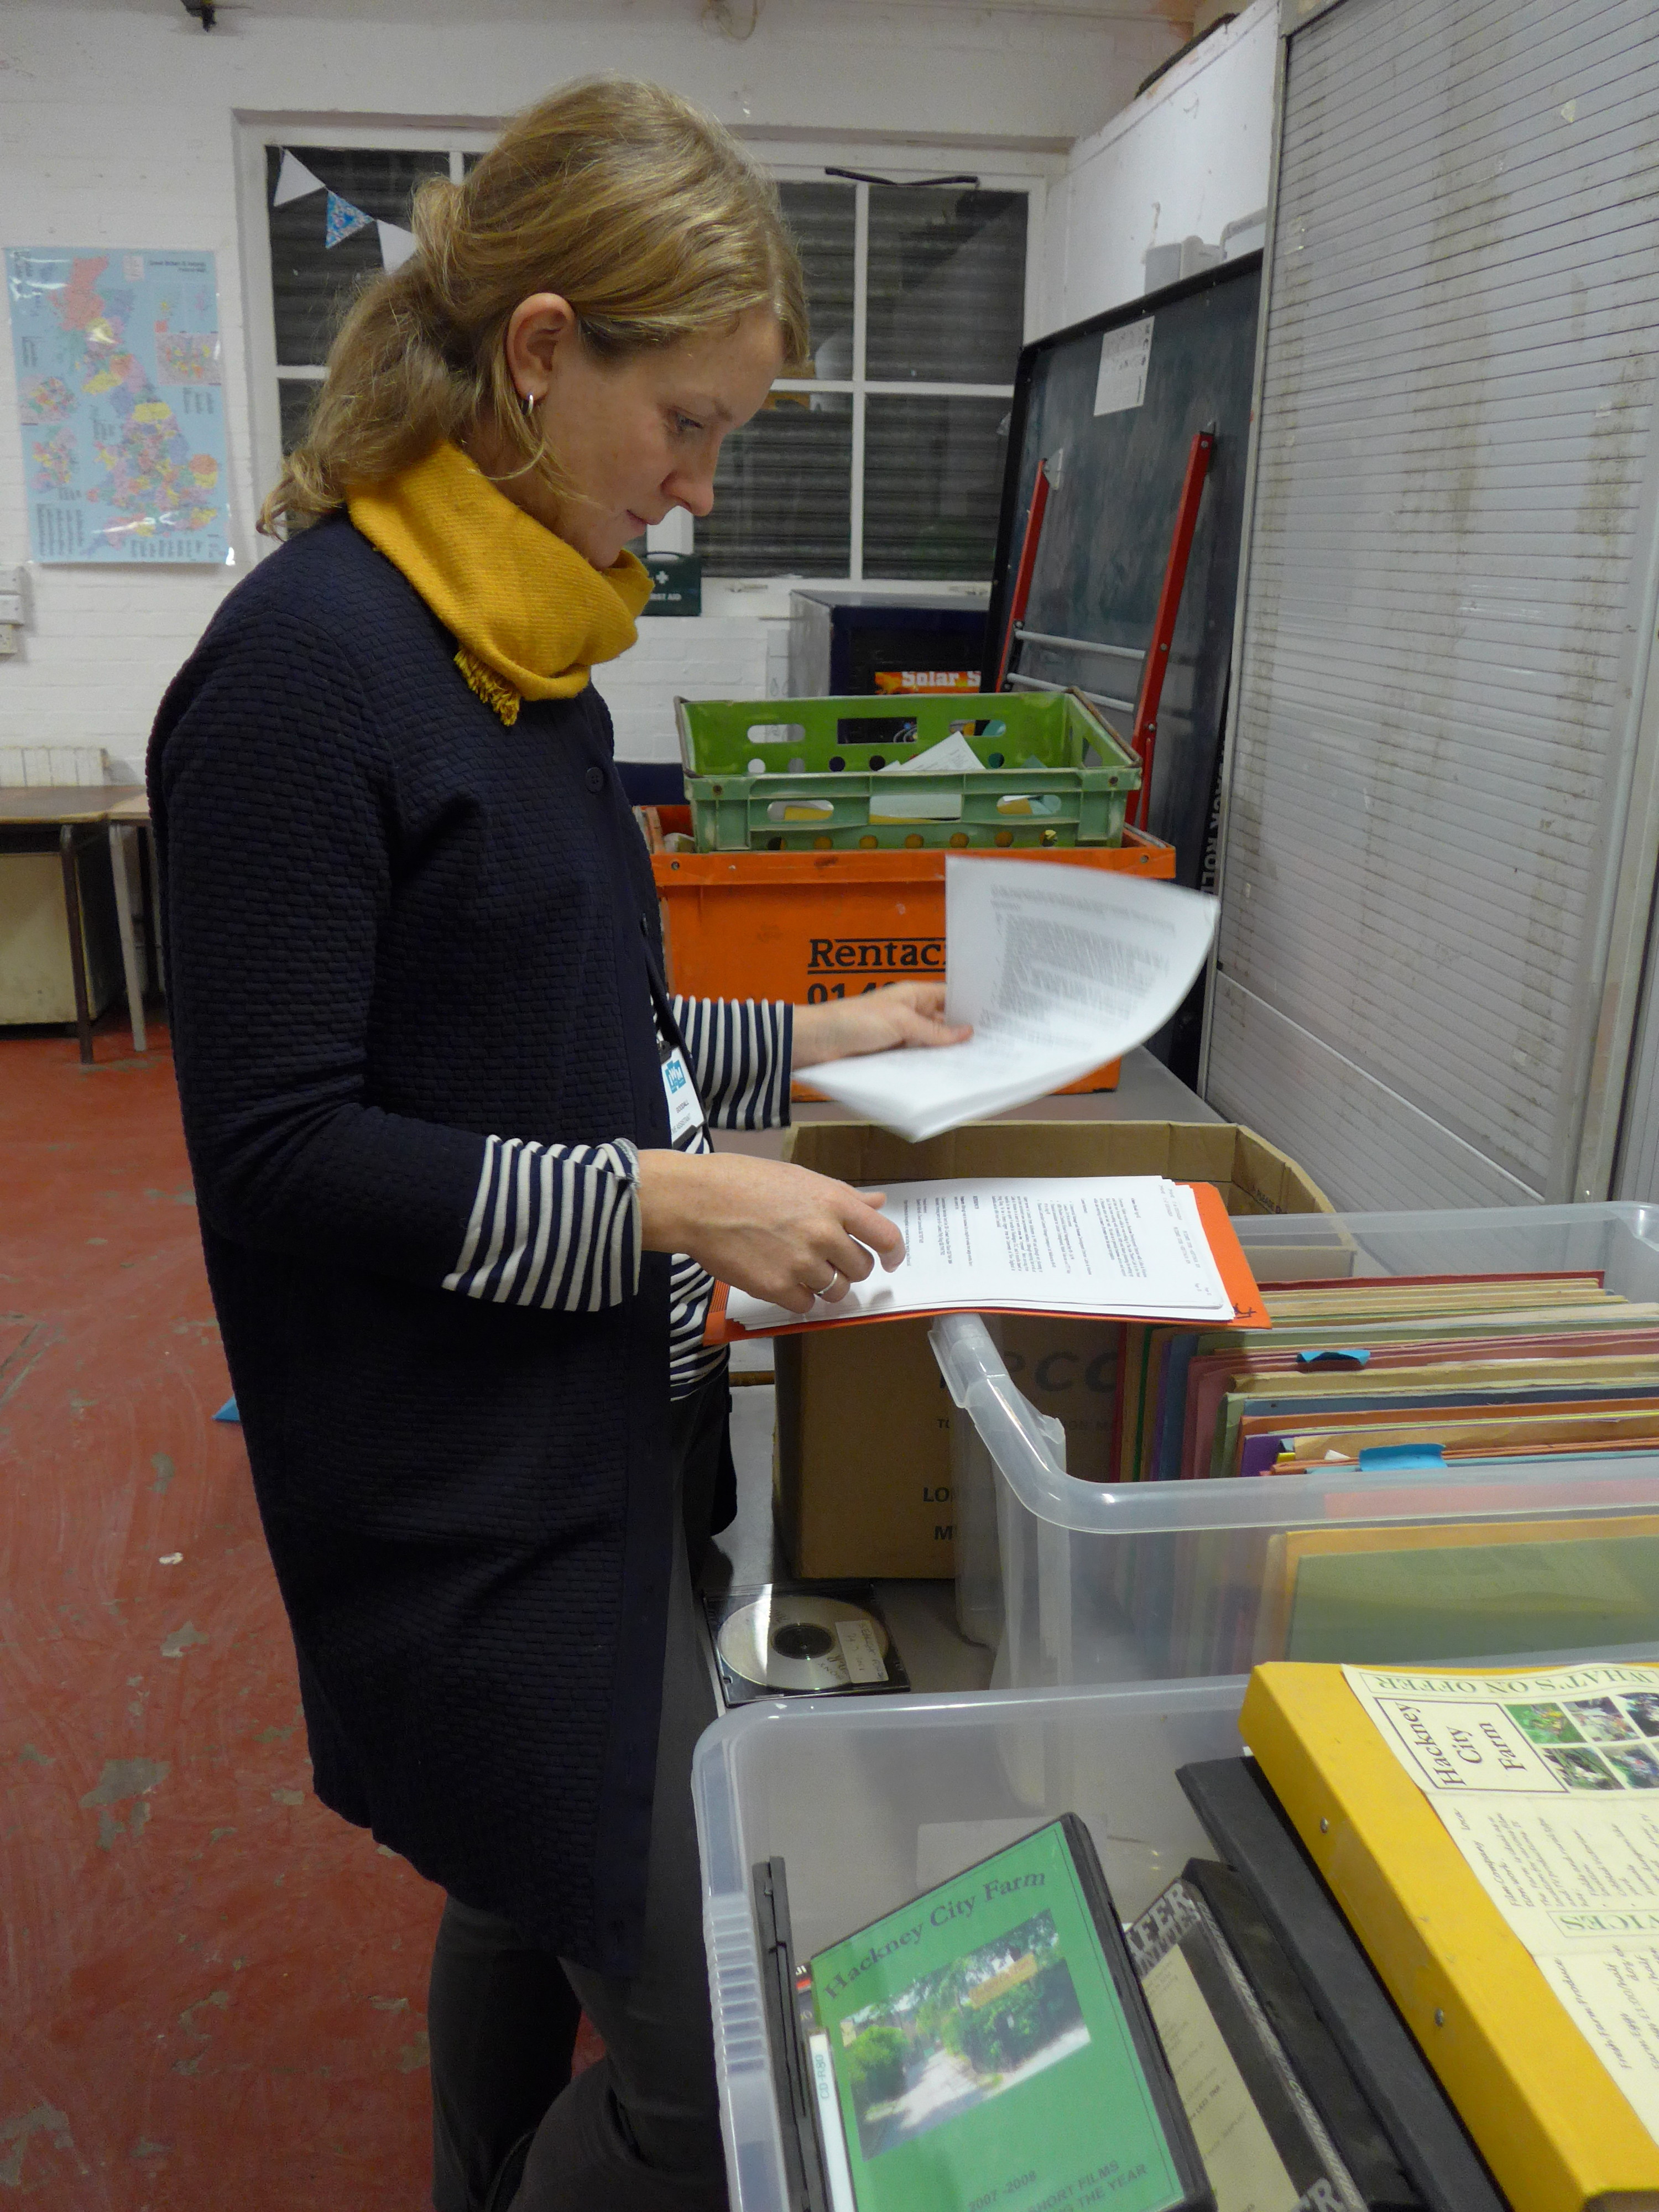 Selecting records to share the heritage